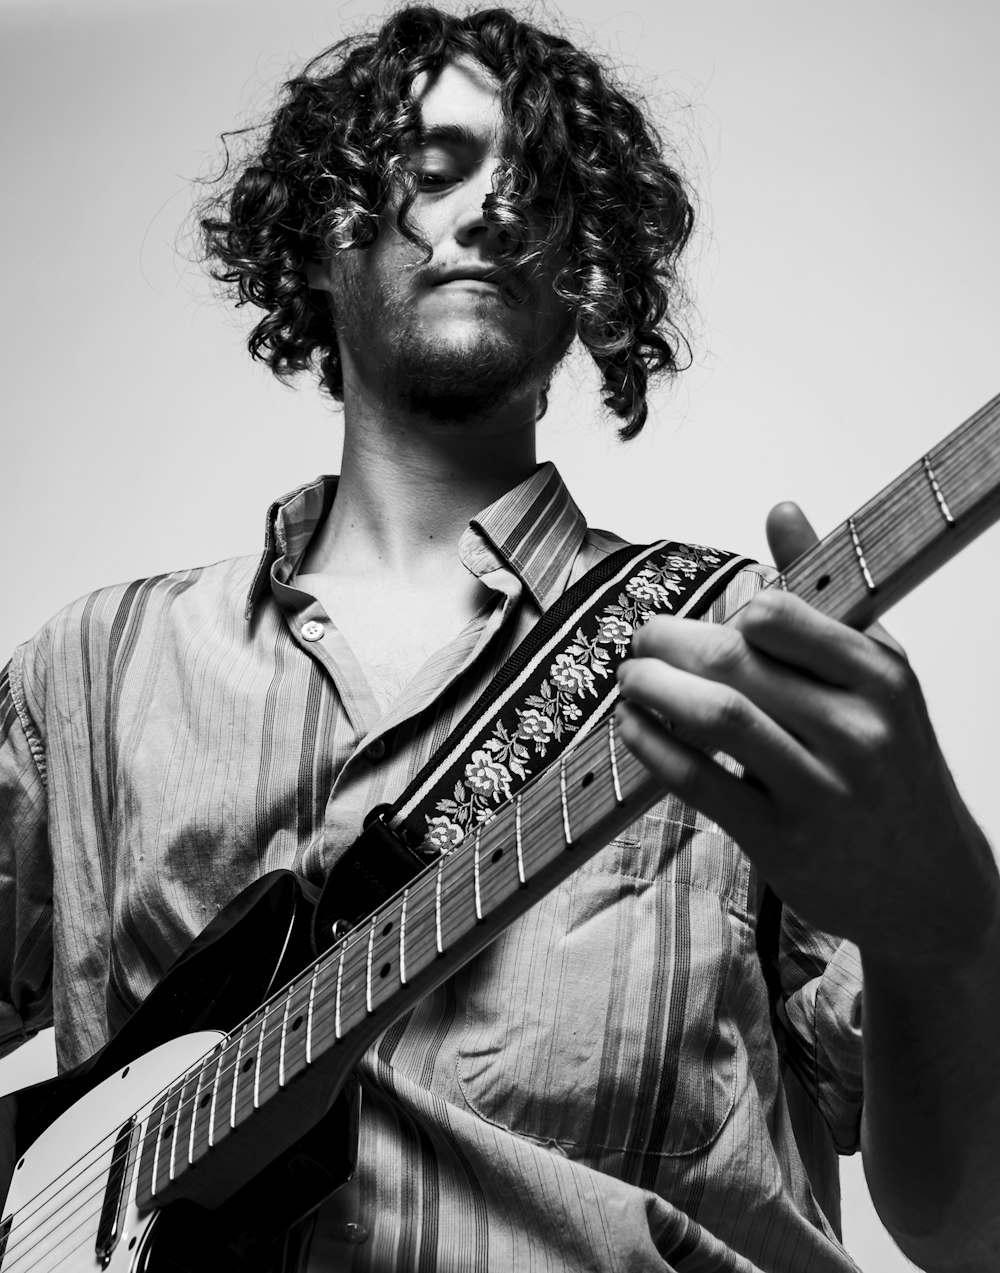 a man with curly hair playing a guitar